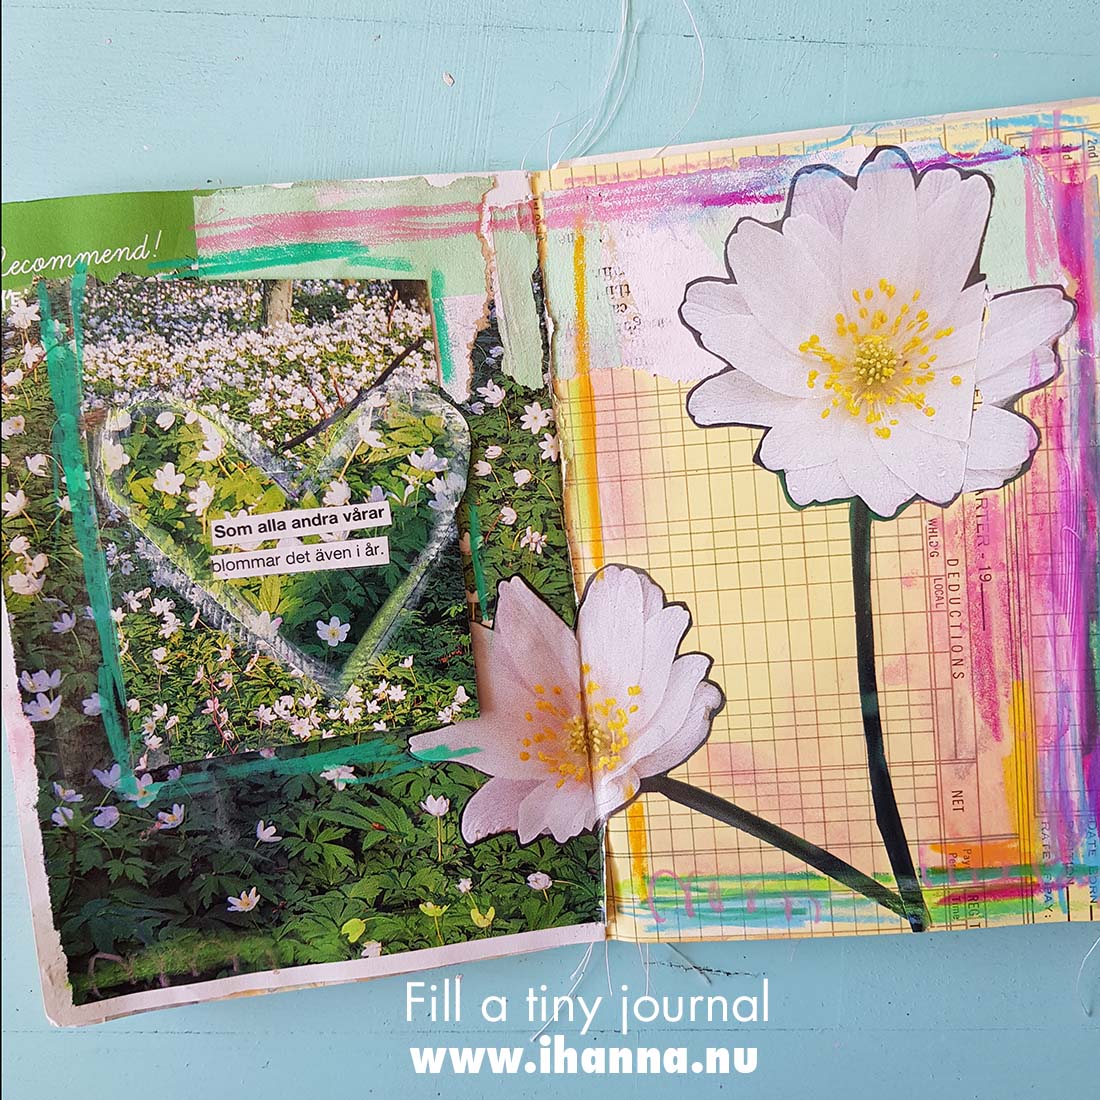 Fill a tiny journal (spring prompt presented) by iHanna #fillatinyjournal